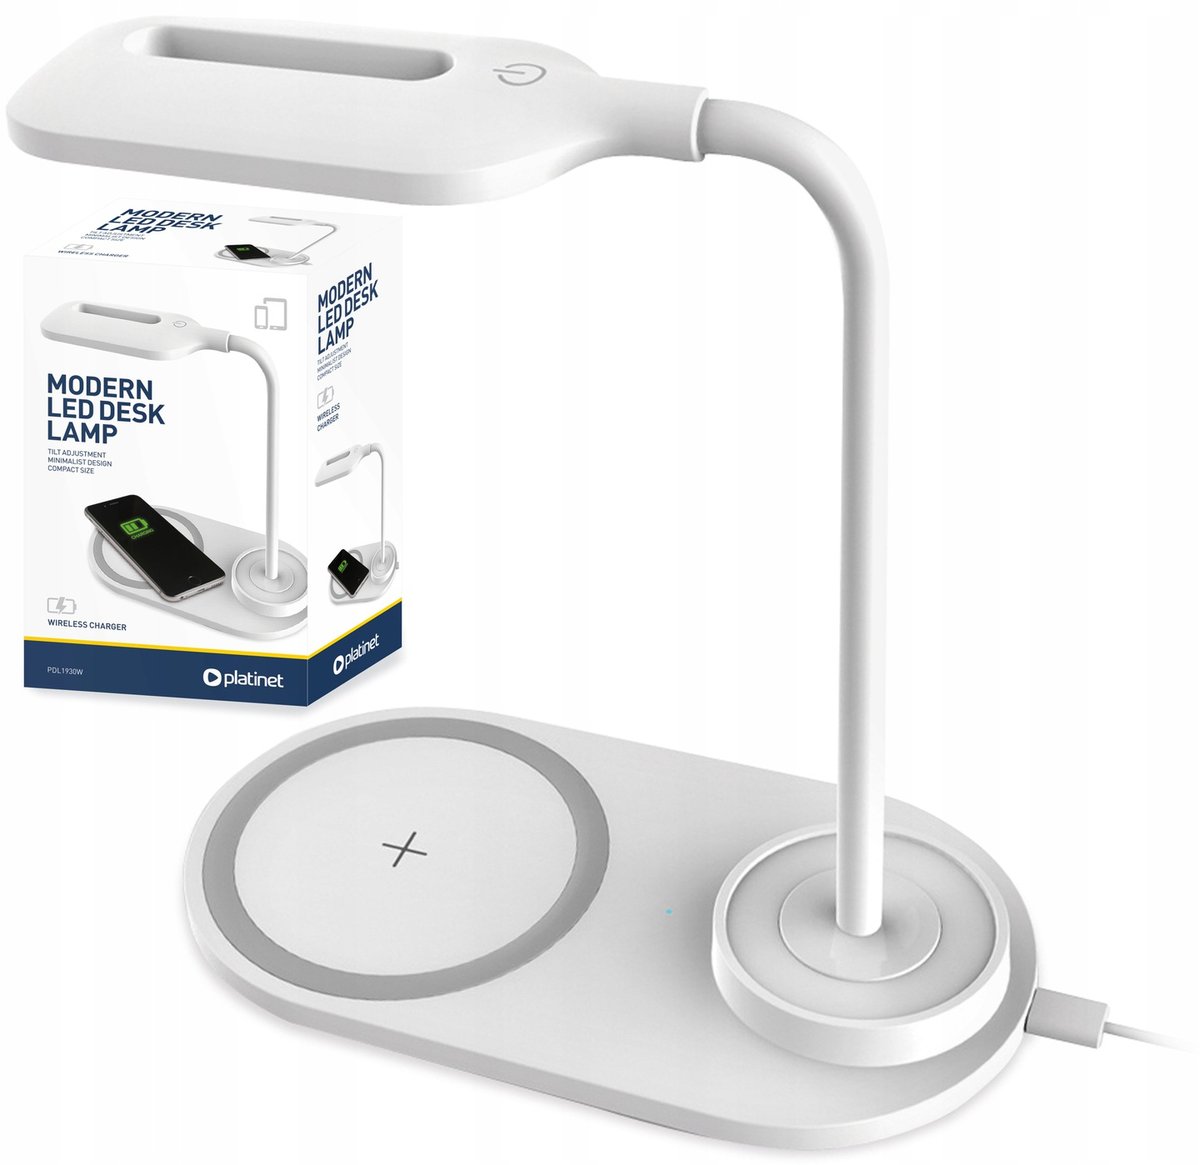 Platinet DESK LAMP WIRLESS CHARGER 5W WHITE [ 45247 ] PDL1930